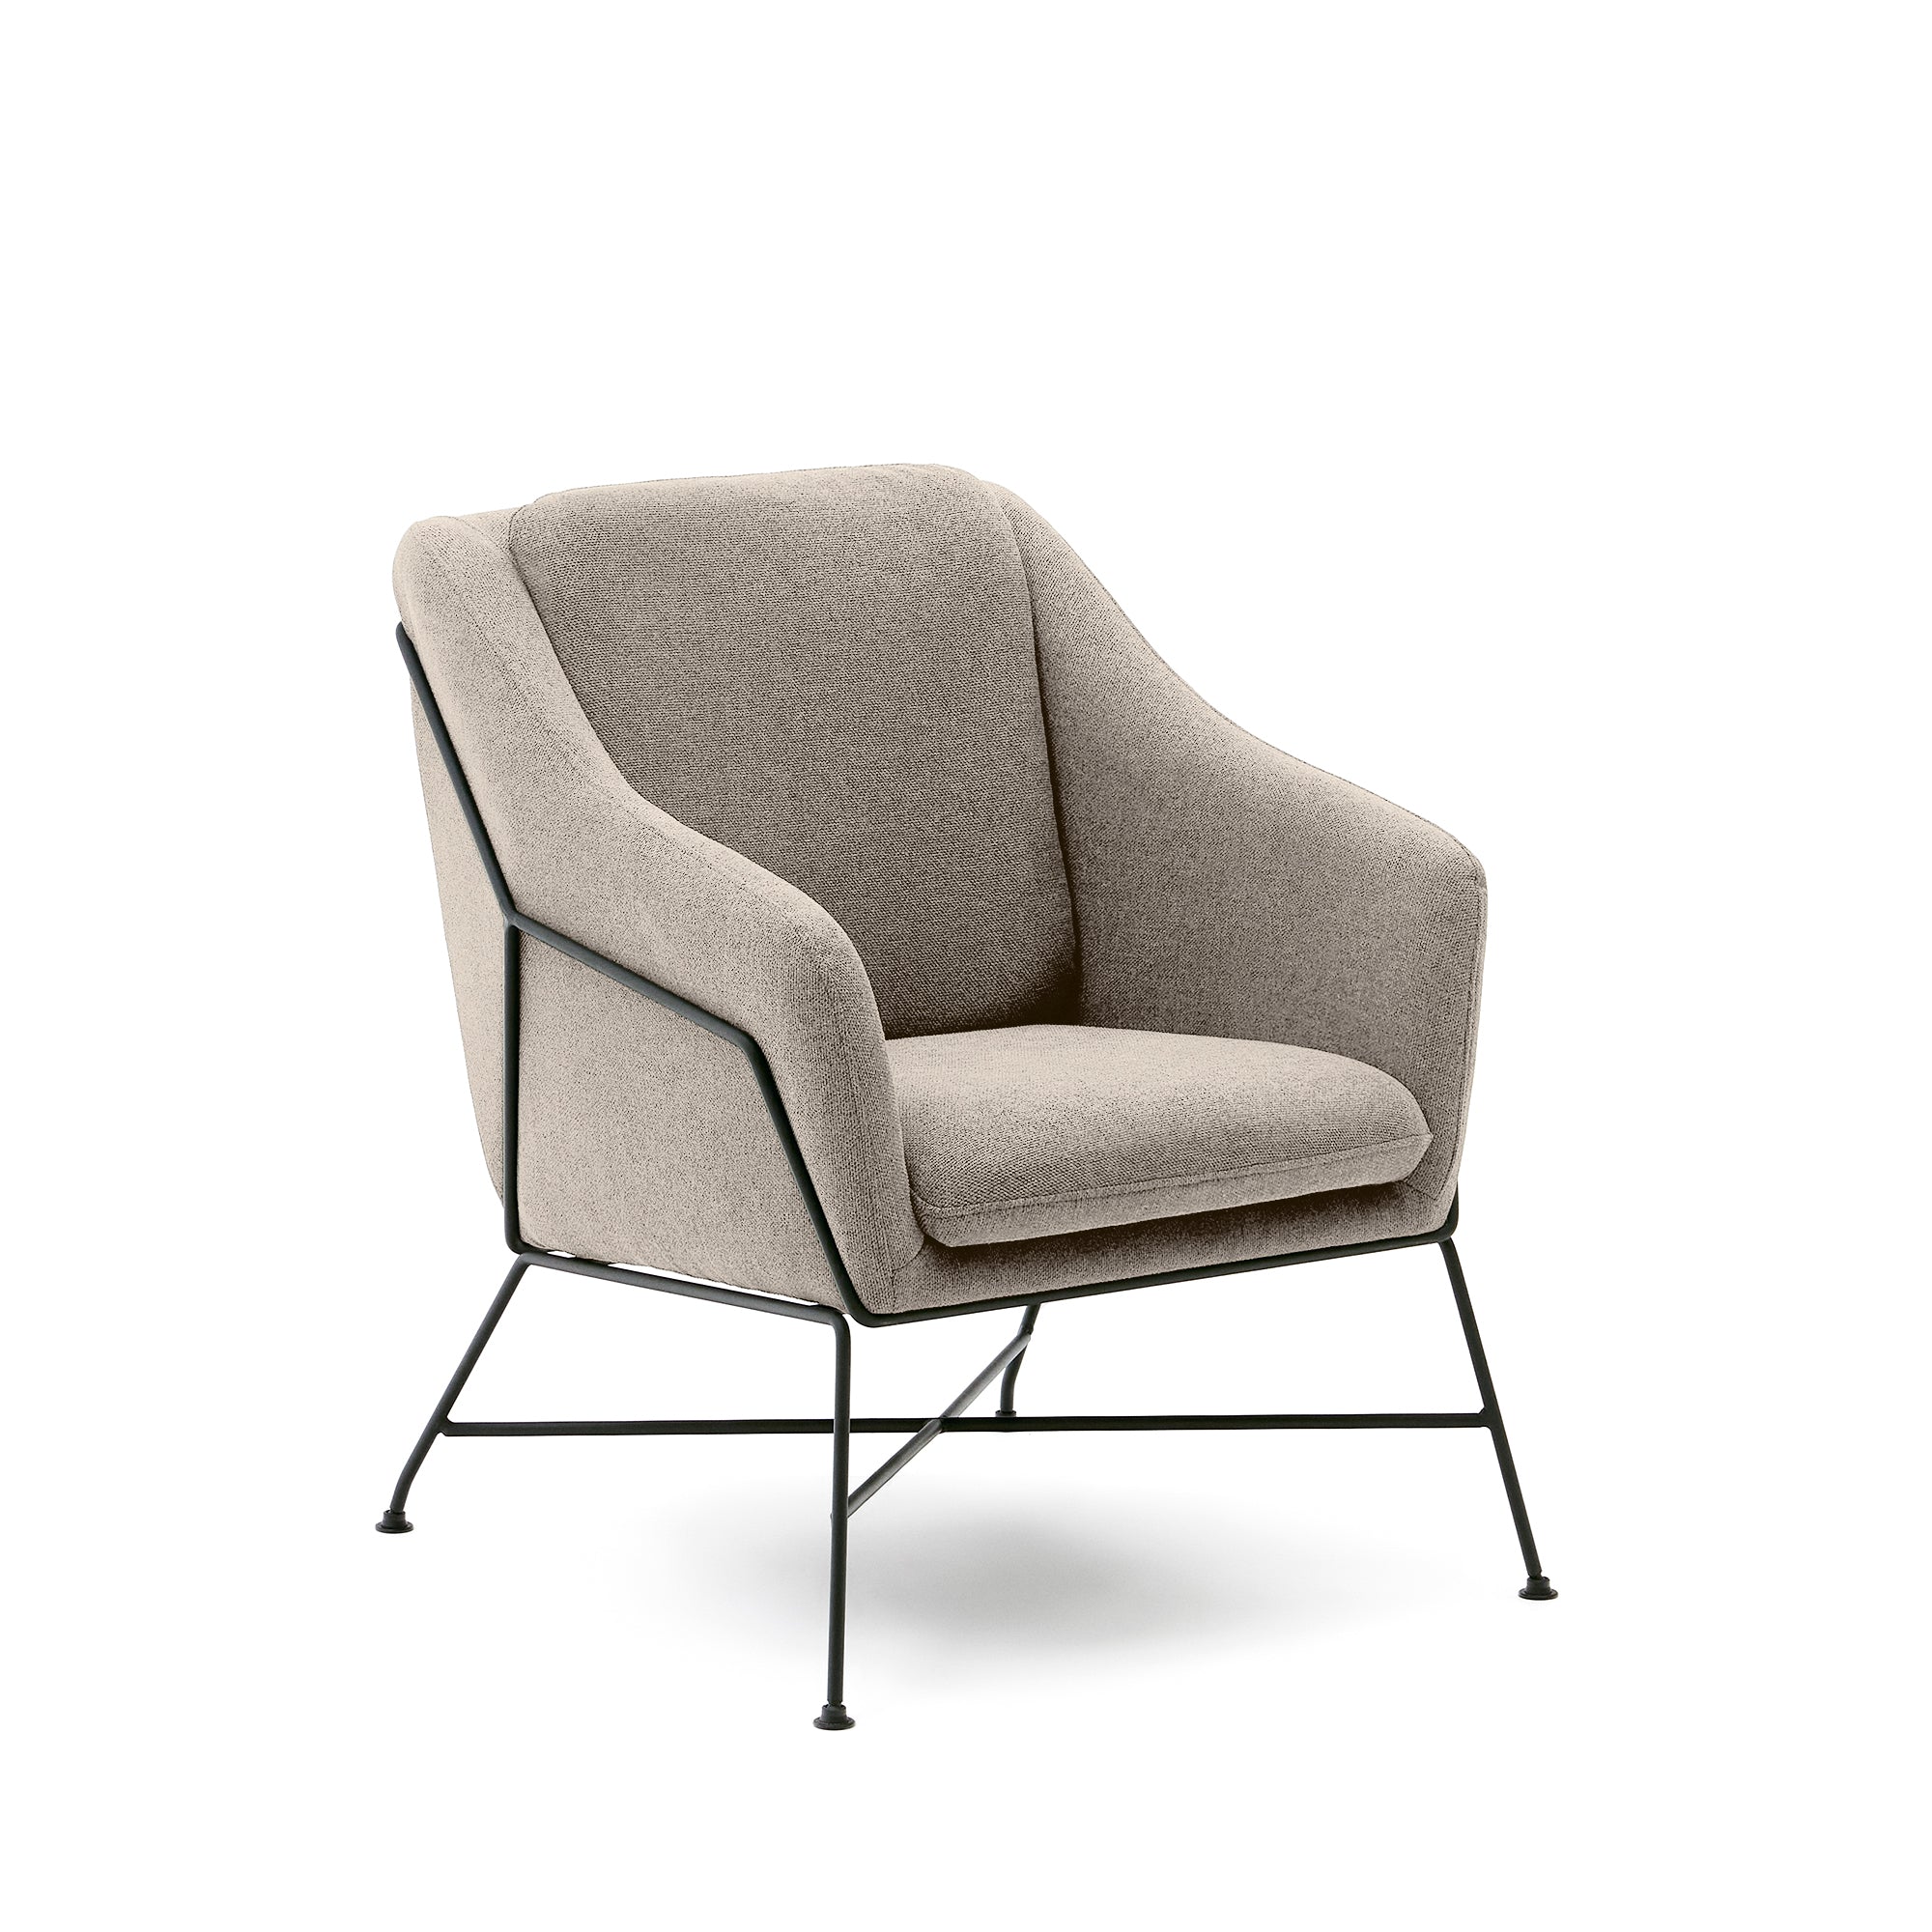 Brida armchair in beige and steel legs with black finish